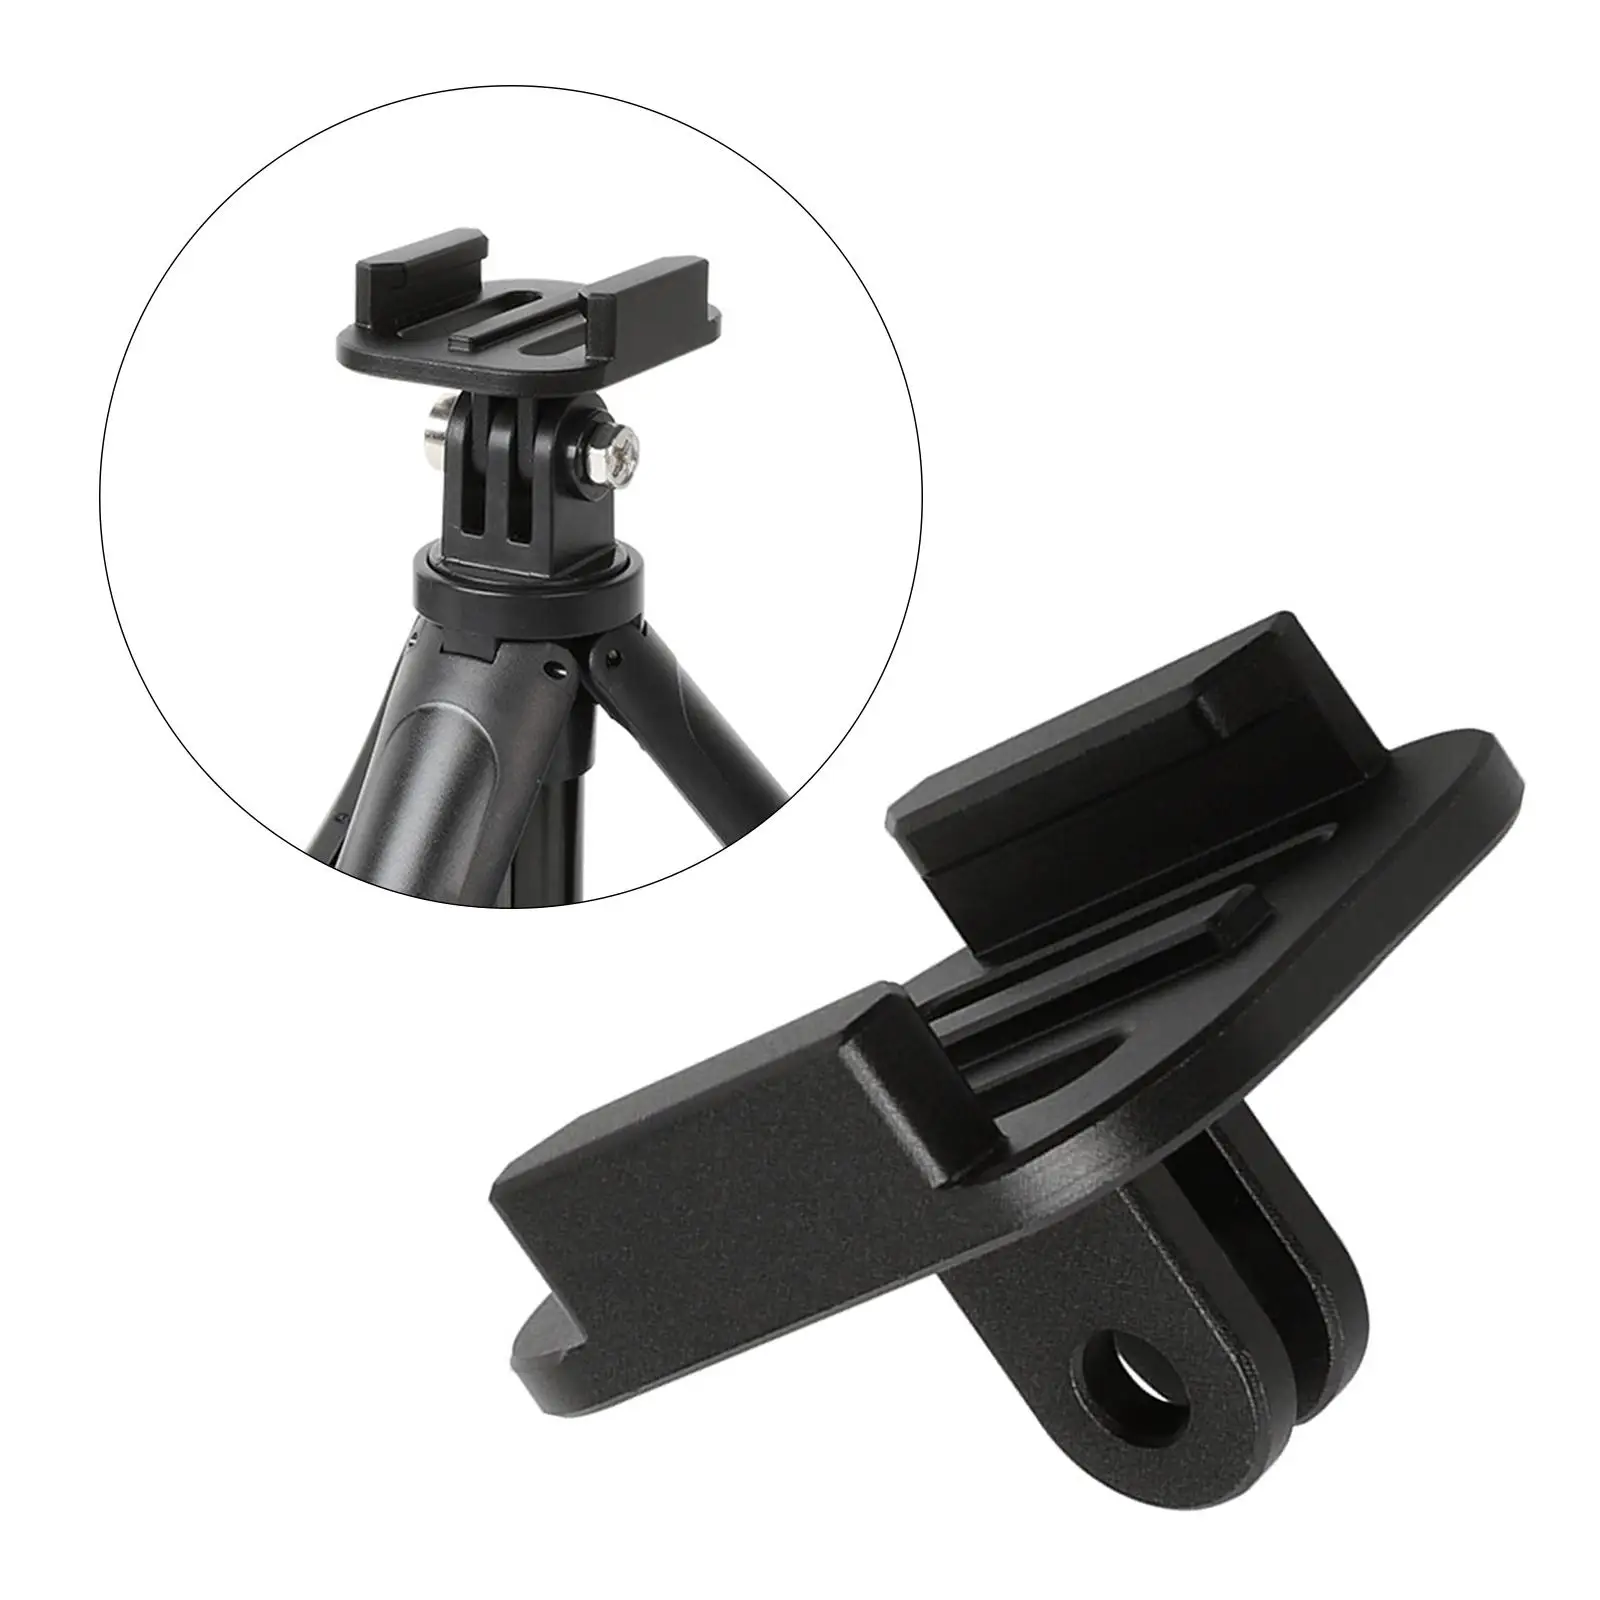 Aluminum Alloy, Camera Release  Adapter, for  Action Cameras Accessories 1 Piece